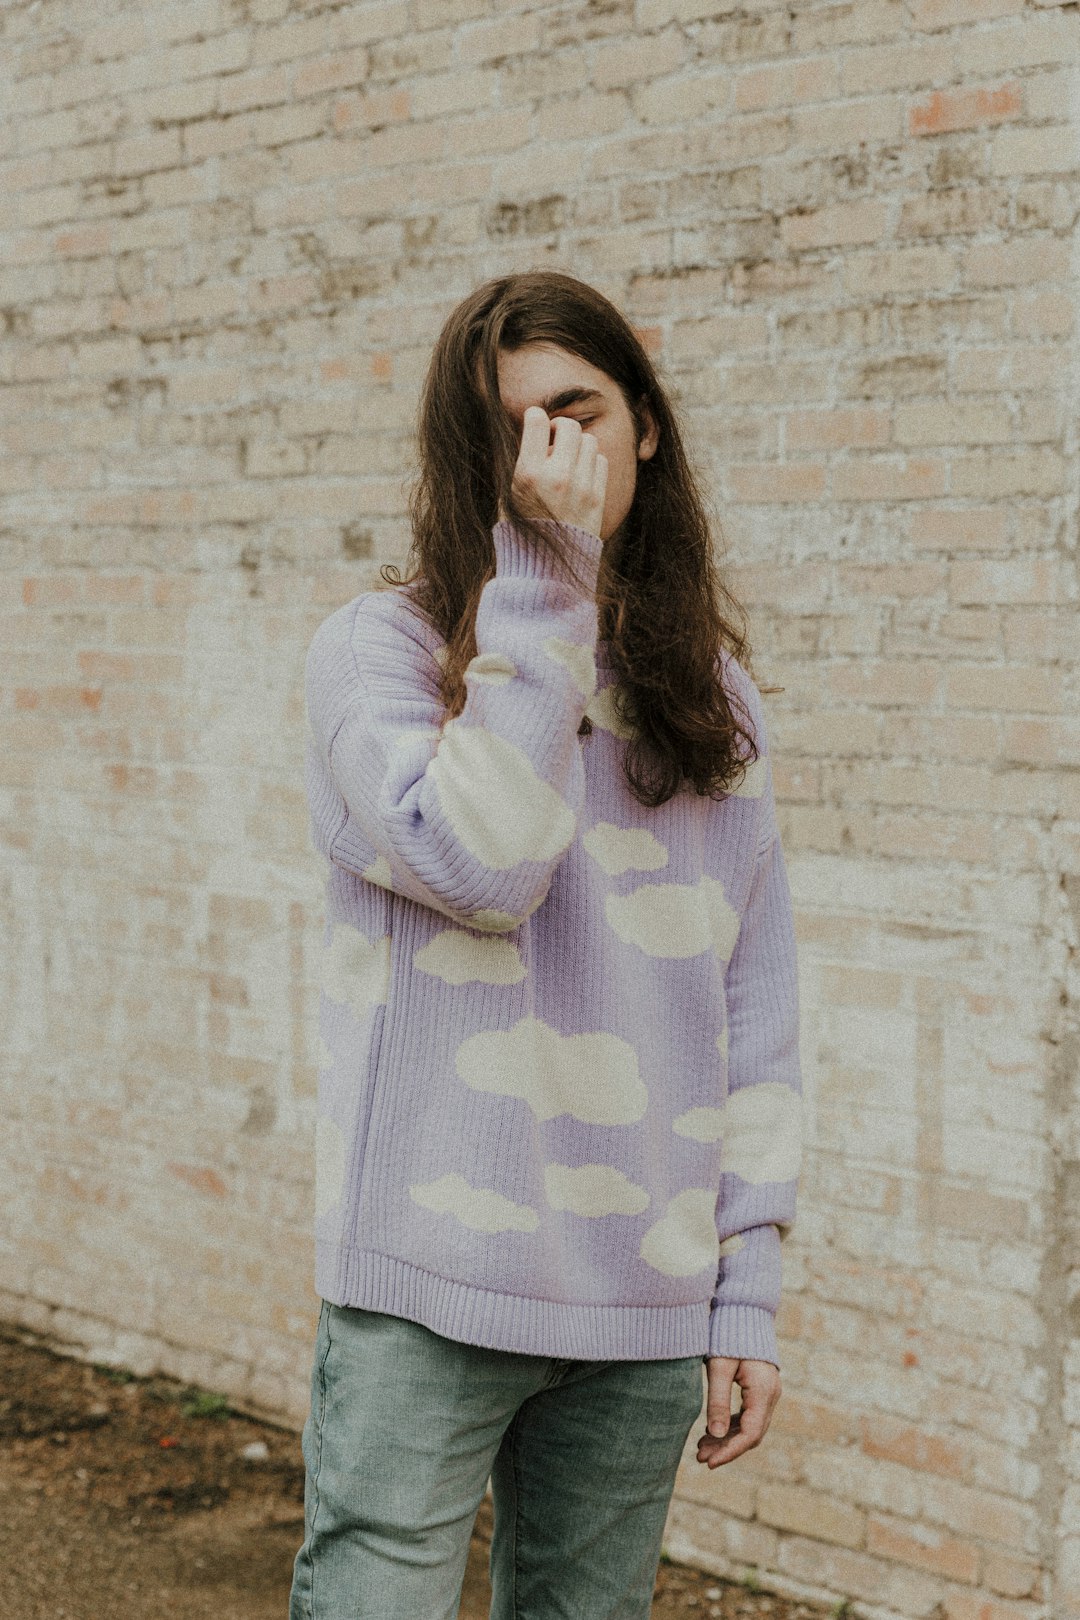 woman in white and purple polka dot long sleeve shirt covering her face with her hands